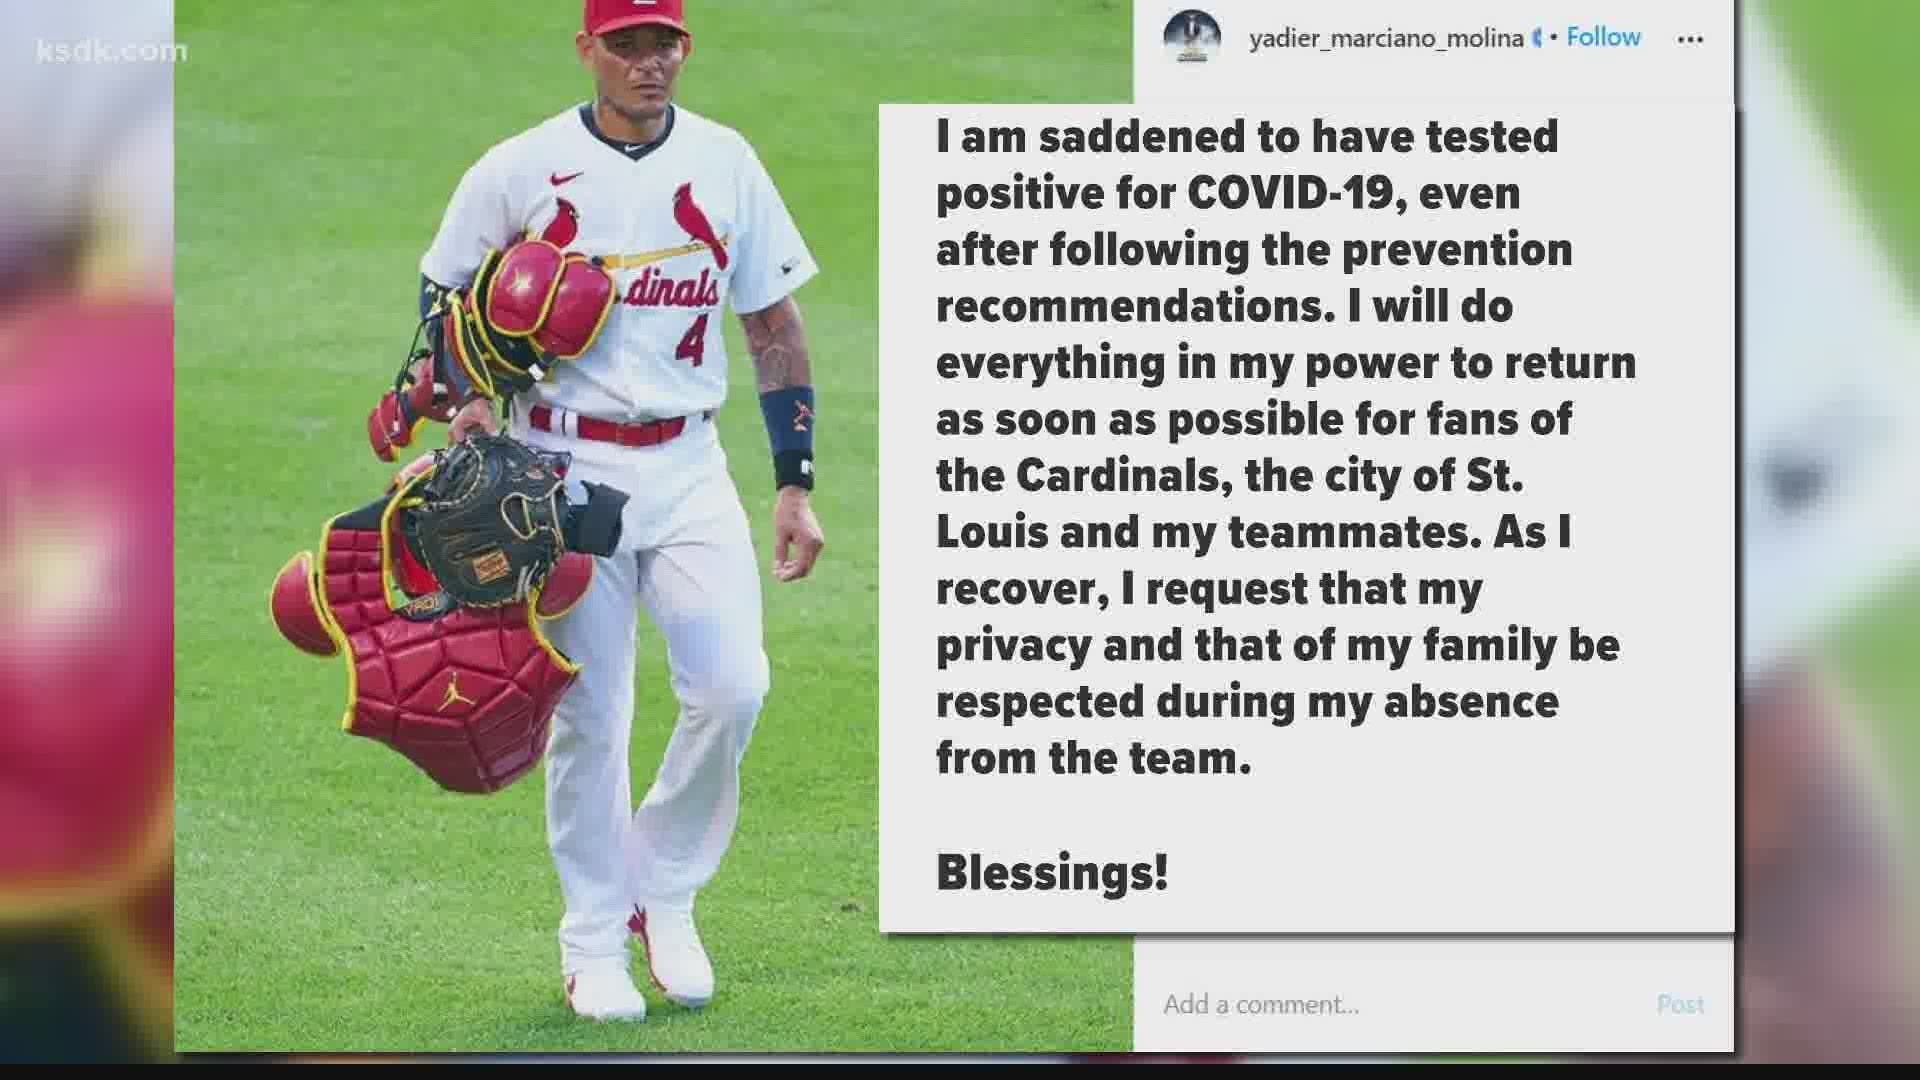 Yadier Molina and Paul DeJong are among those who tested positive for COVID-19.